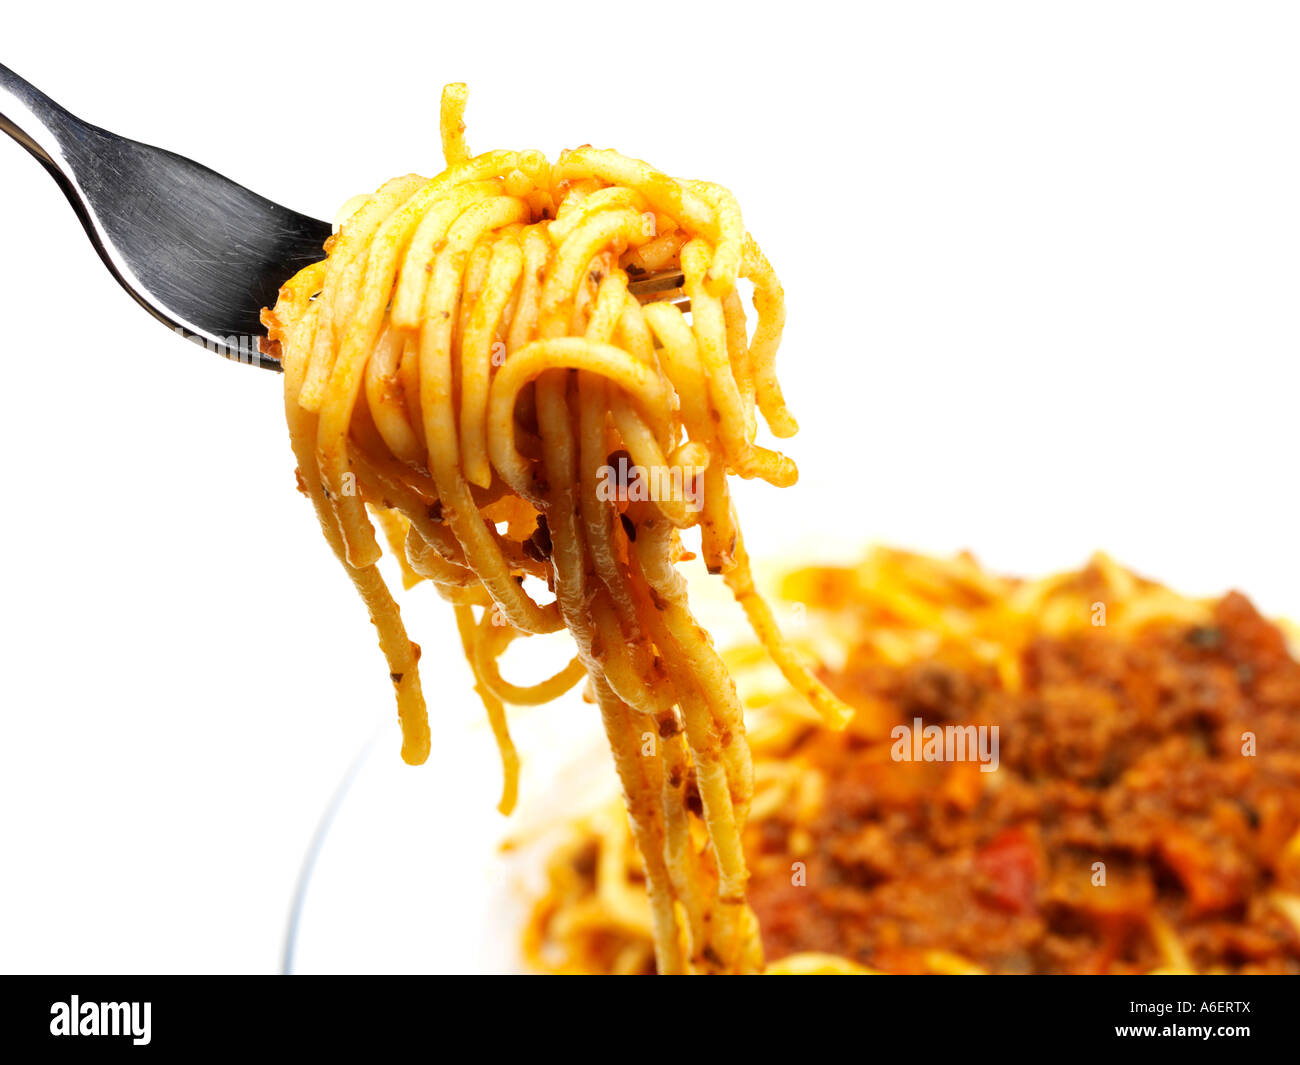 Fresh Italian Style Cooked Spaghetti Bolognese Pasta Meal Isolated Against A White Background With A Clipping Path And No People Stock Photo